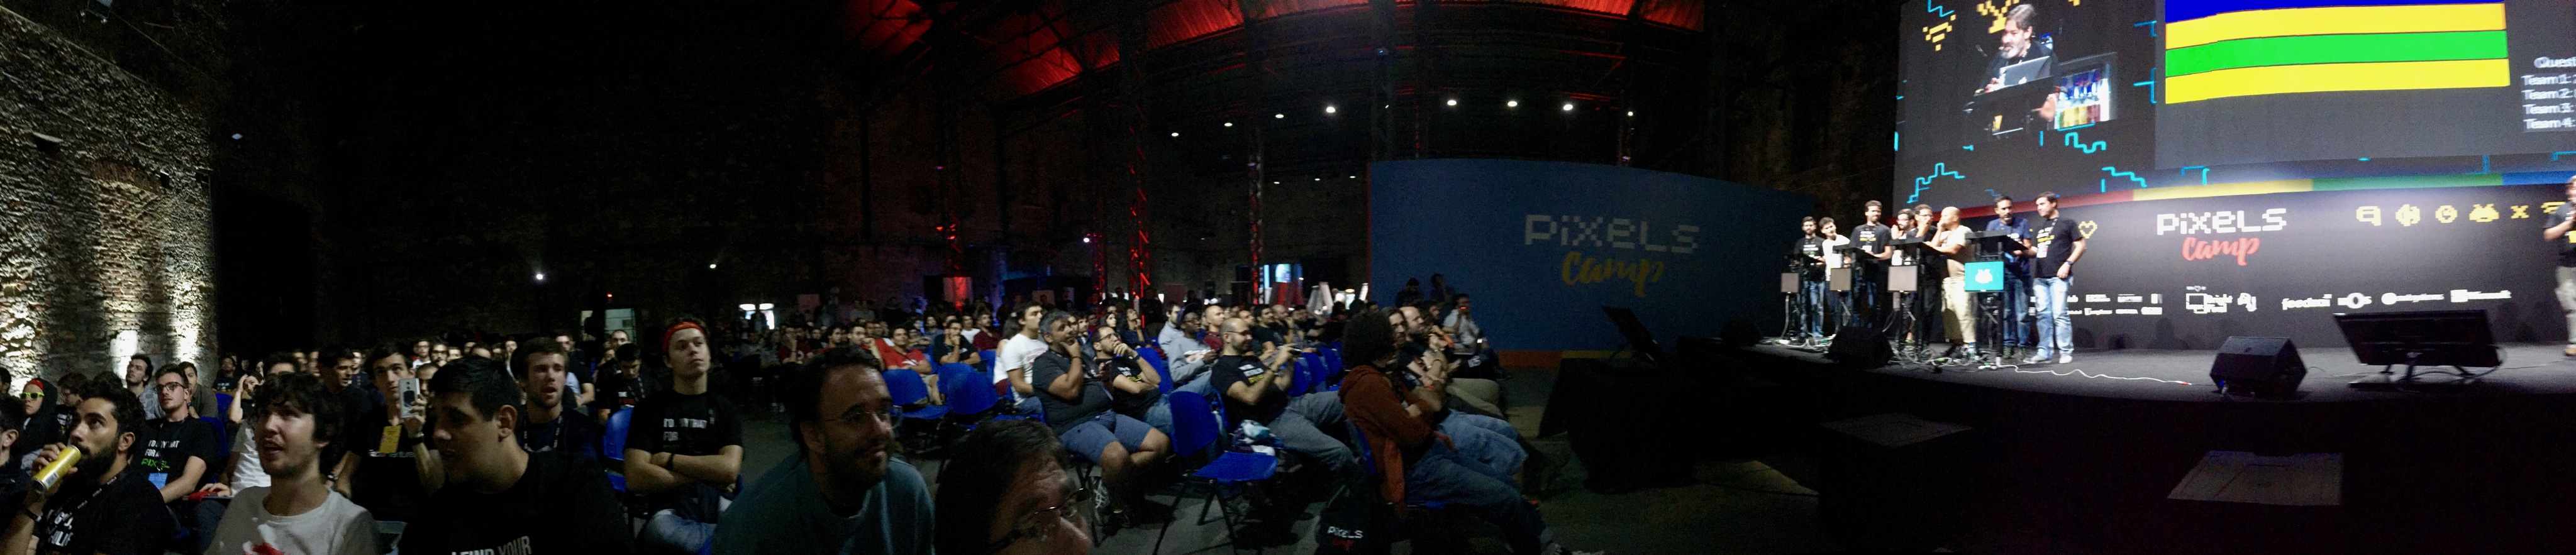 a panorama of the Pixels Camp main stage, showing the audience and contestants on stage